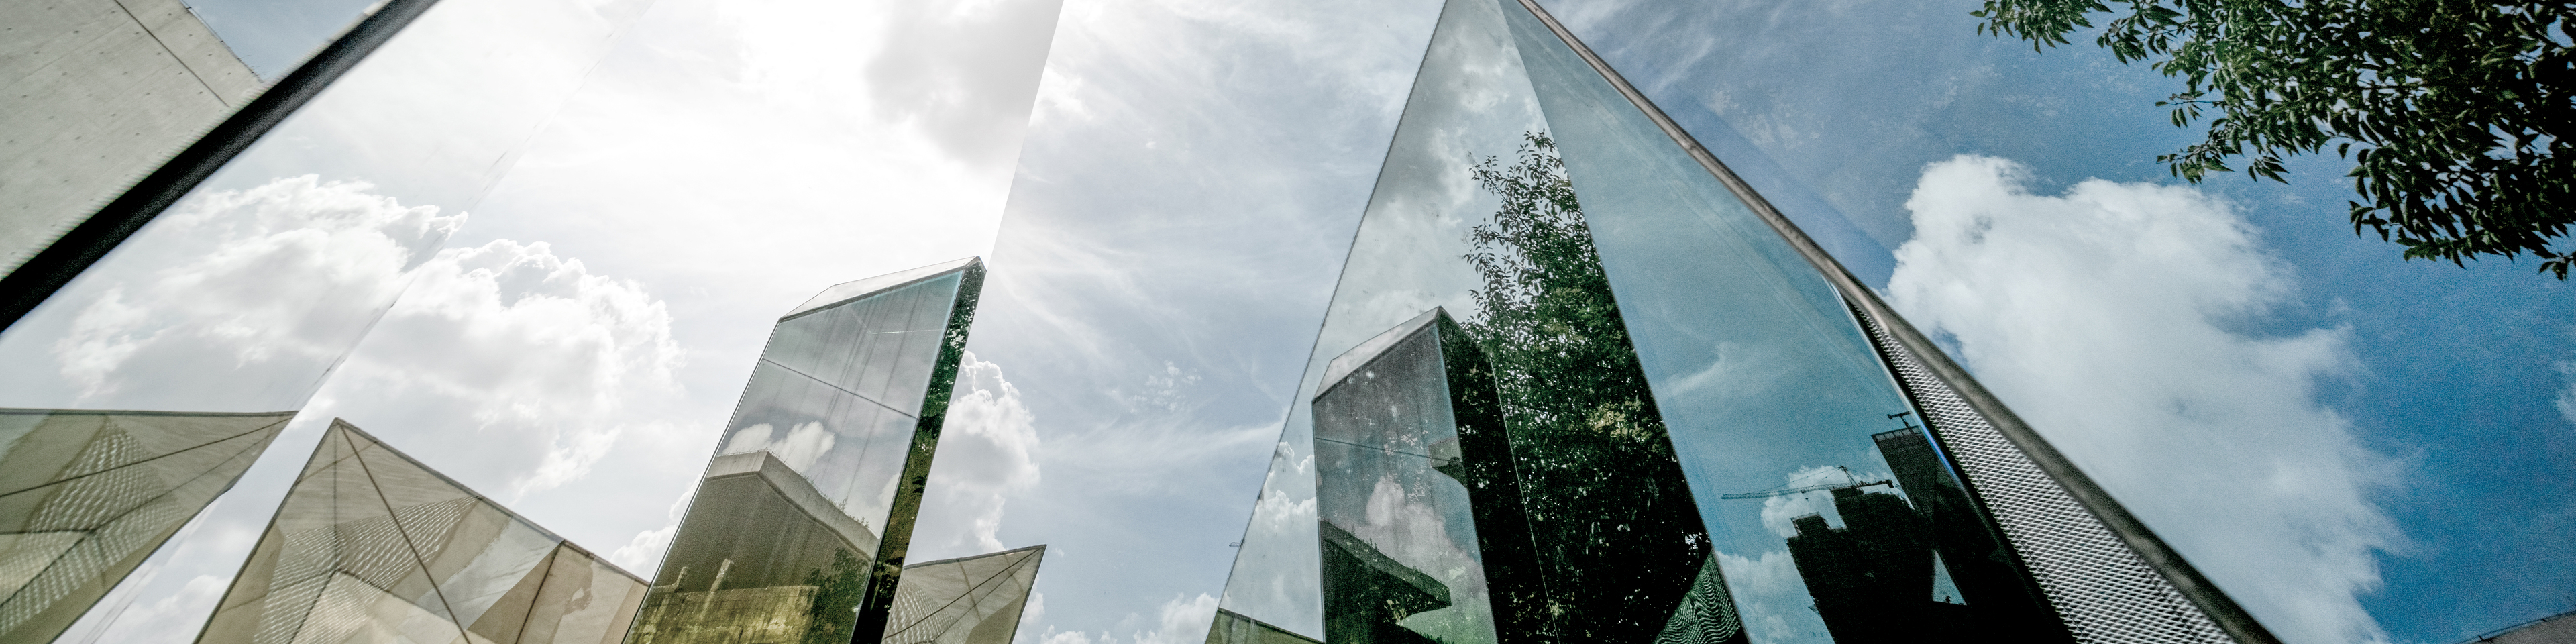 Urban landscape reflected by polyhedral glass